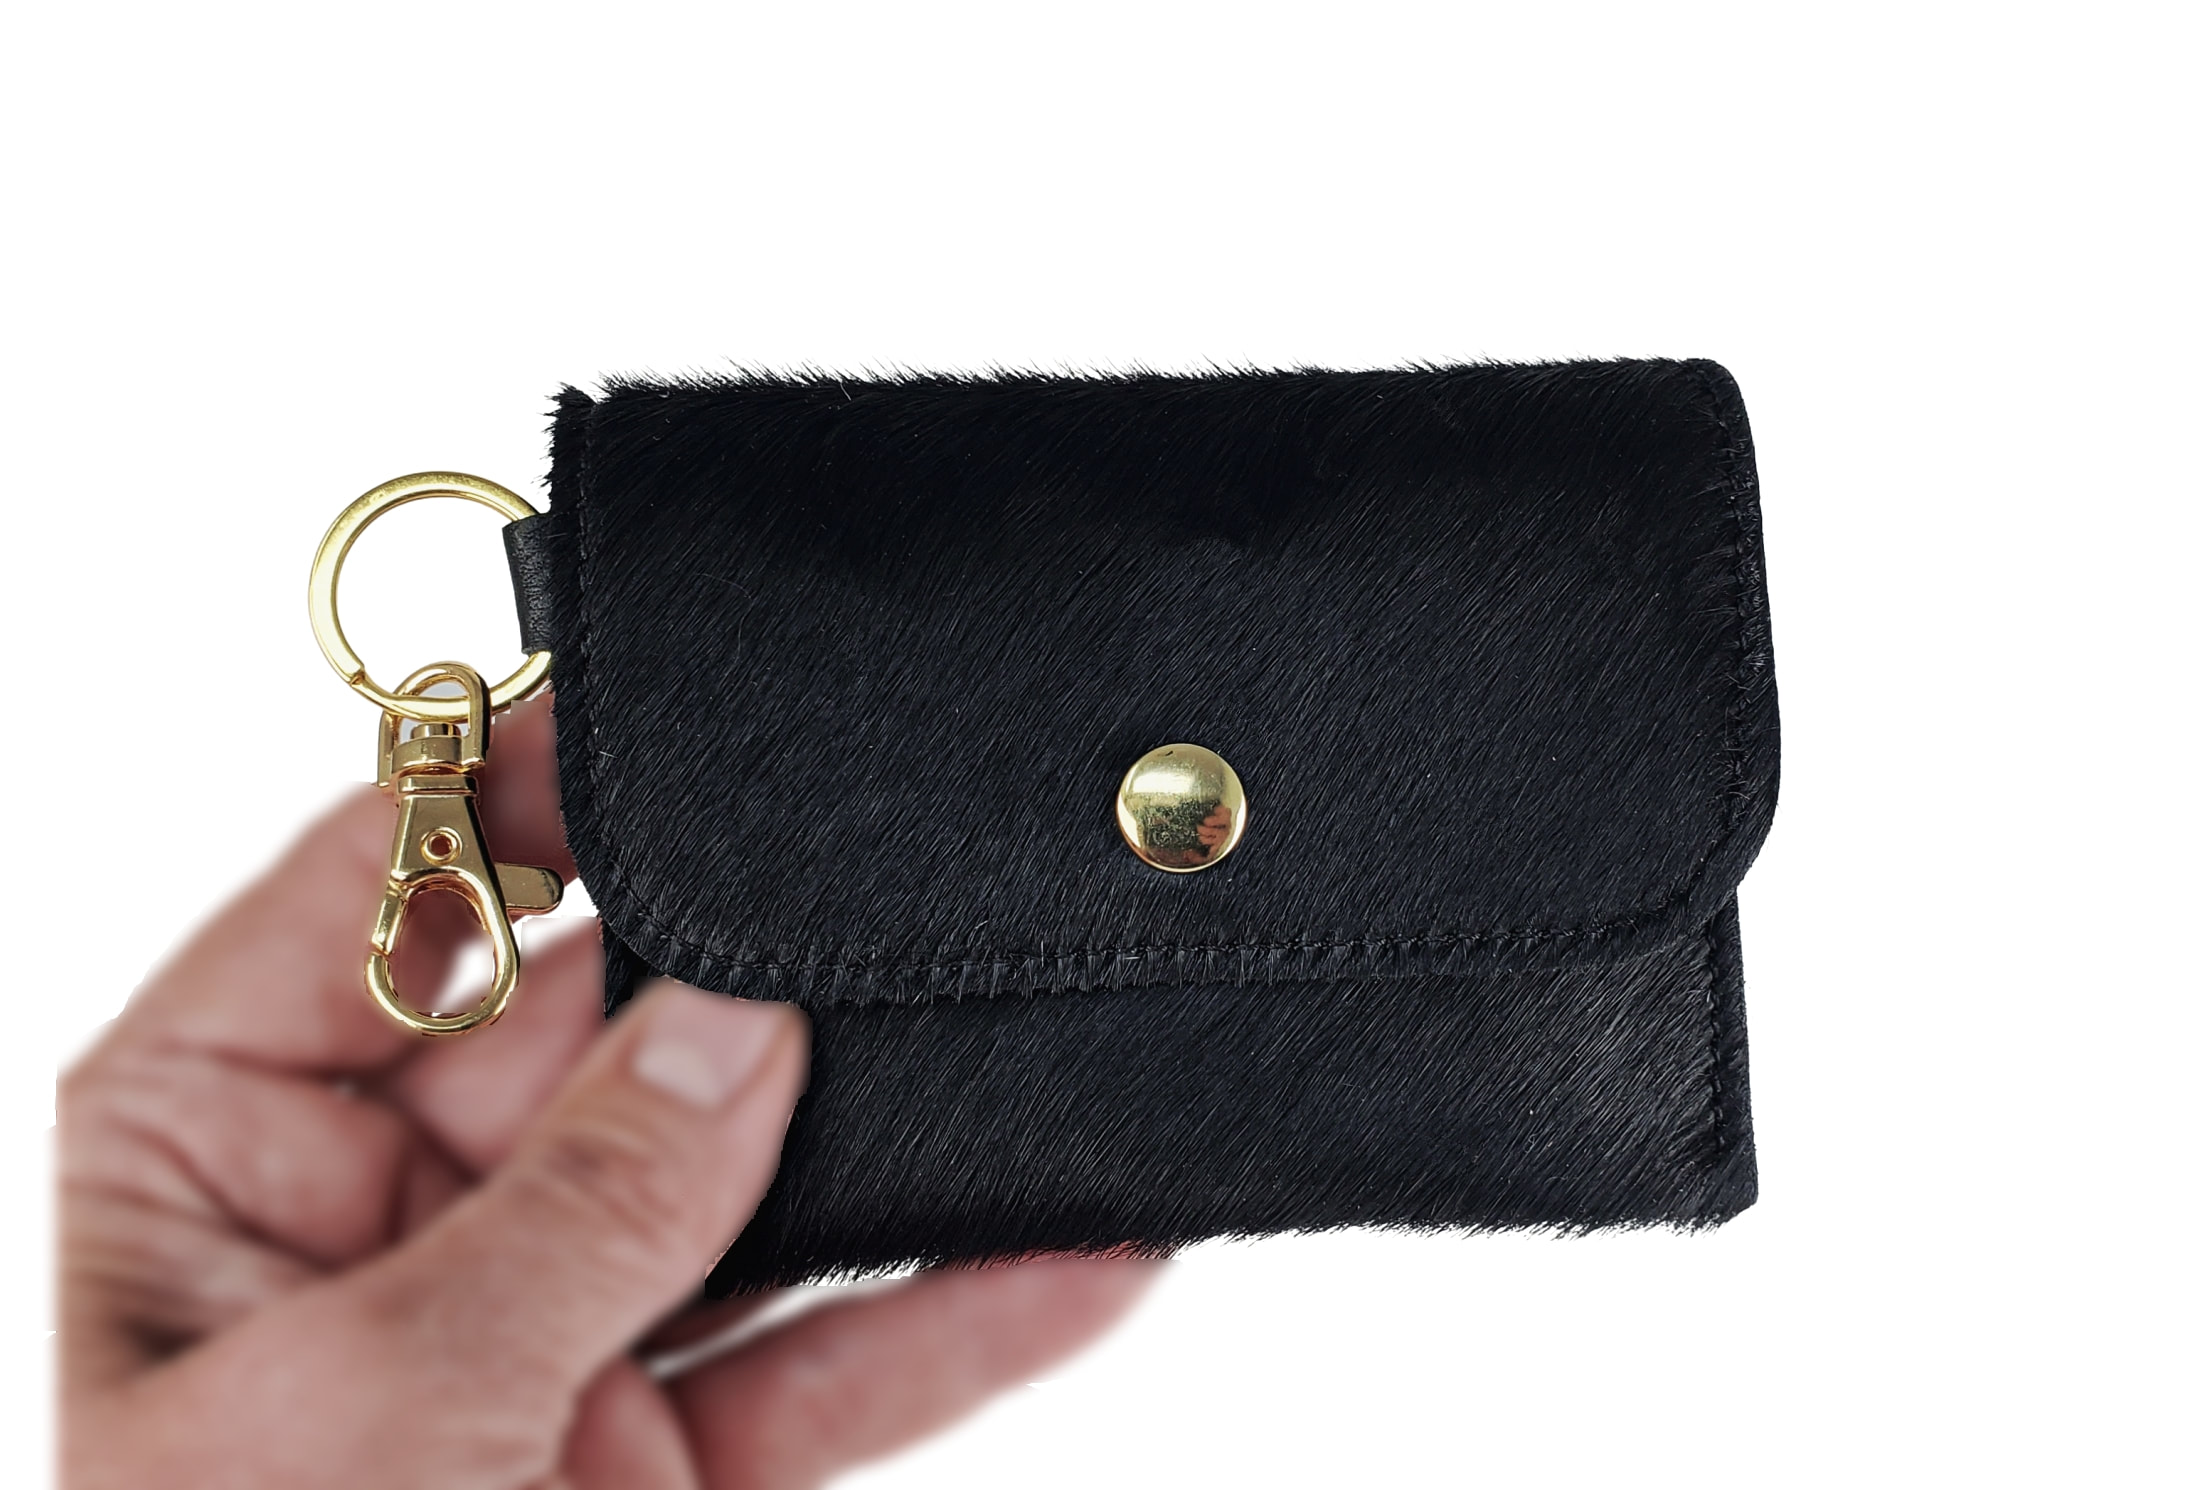 Key Chain ID Card Wallet, Cowhide Leather, Business Card Holder